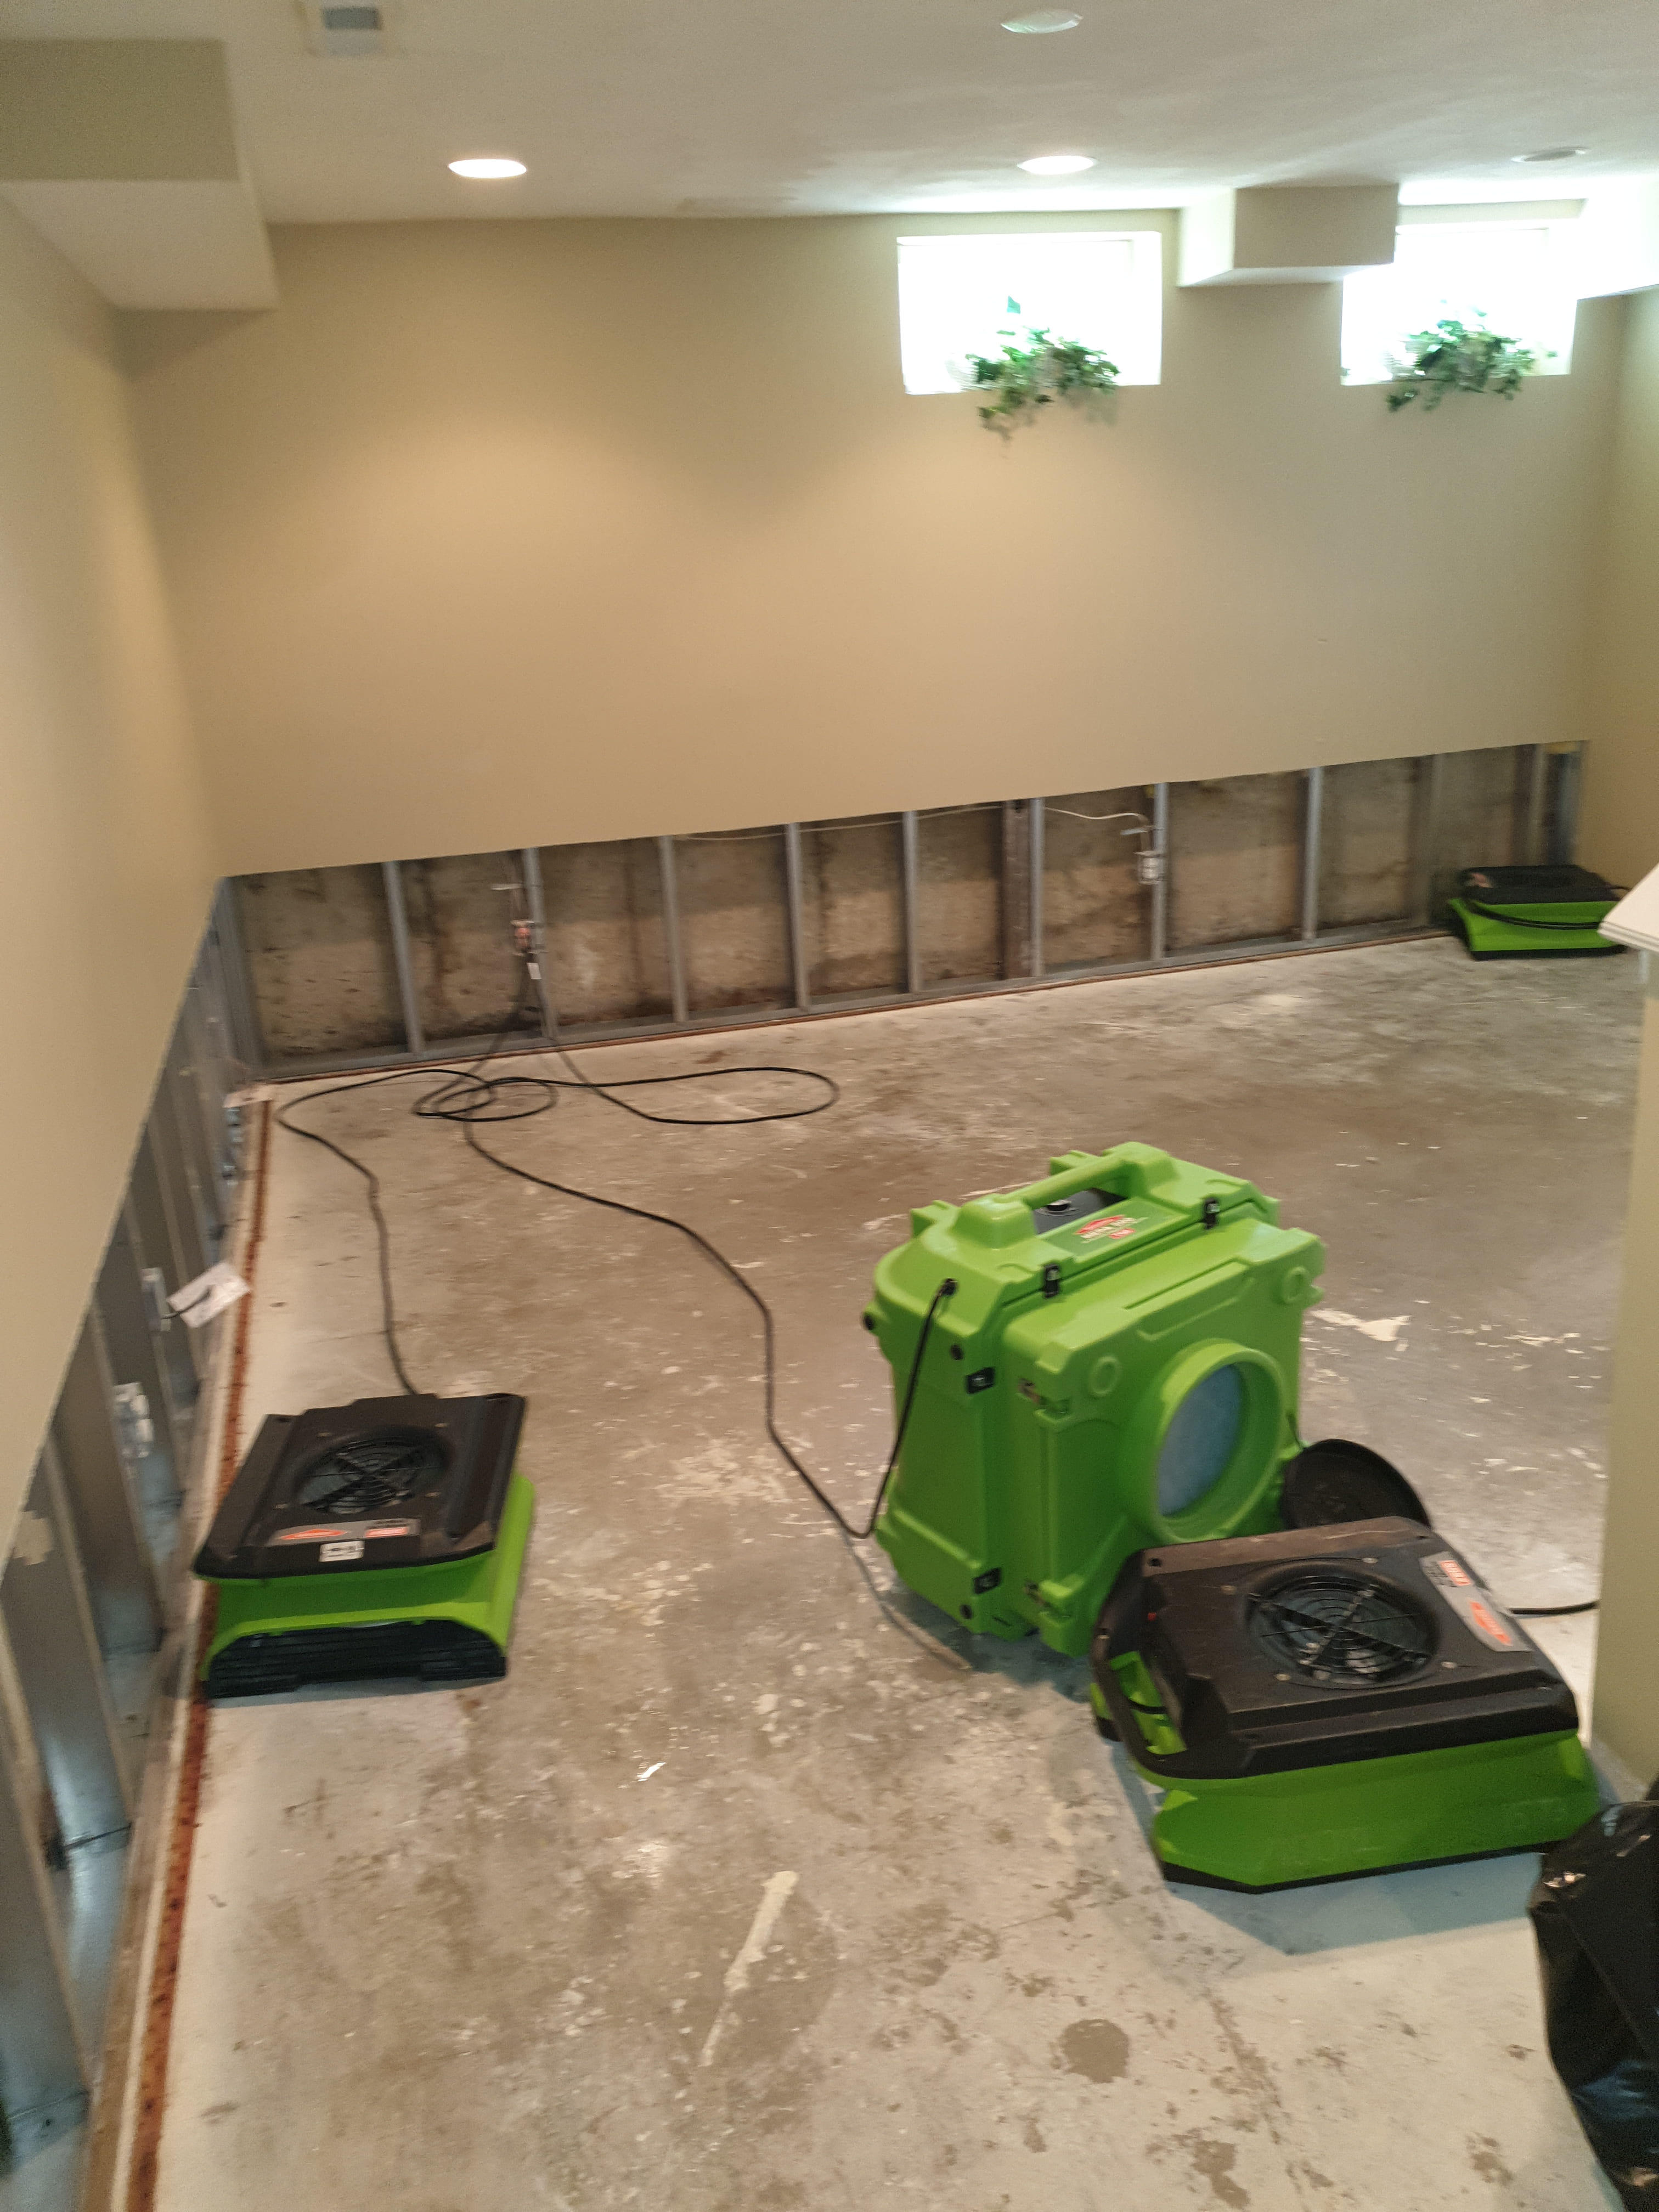 Water damage is no match for our swift reaction and advanced drying procedures. SERVPRO of Affton/ Webster Grove has arrived!